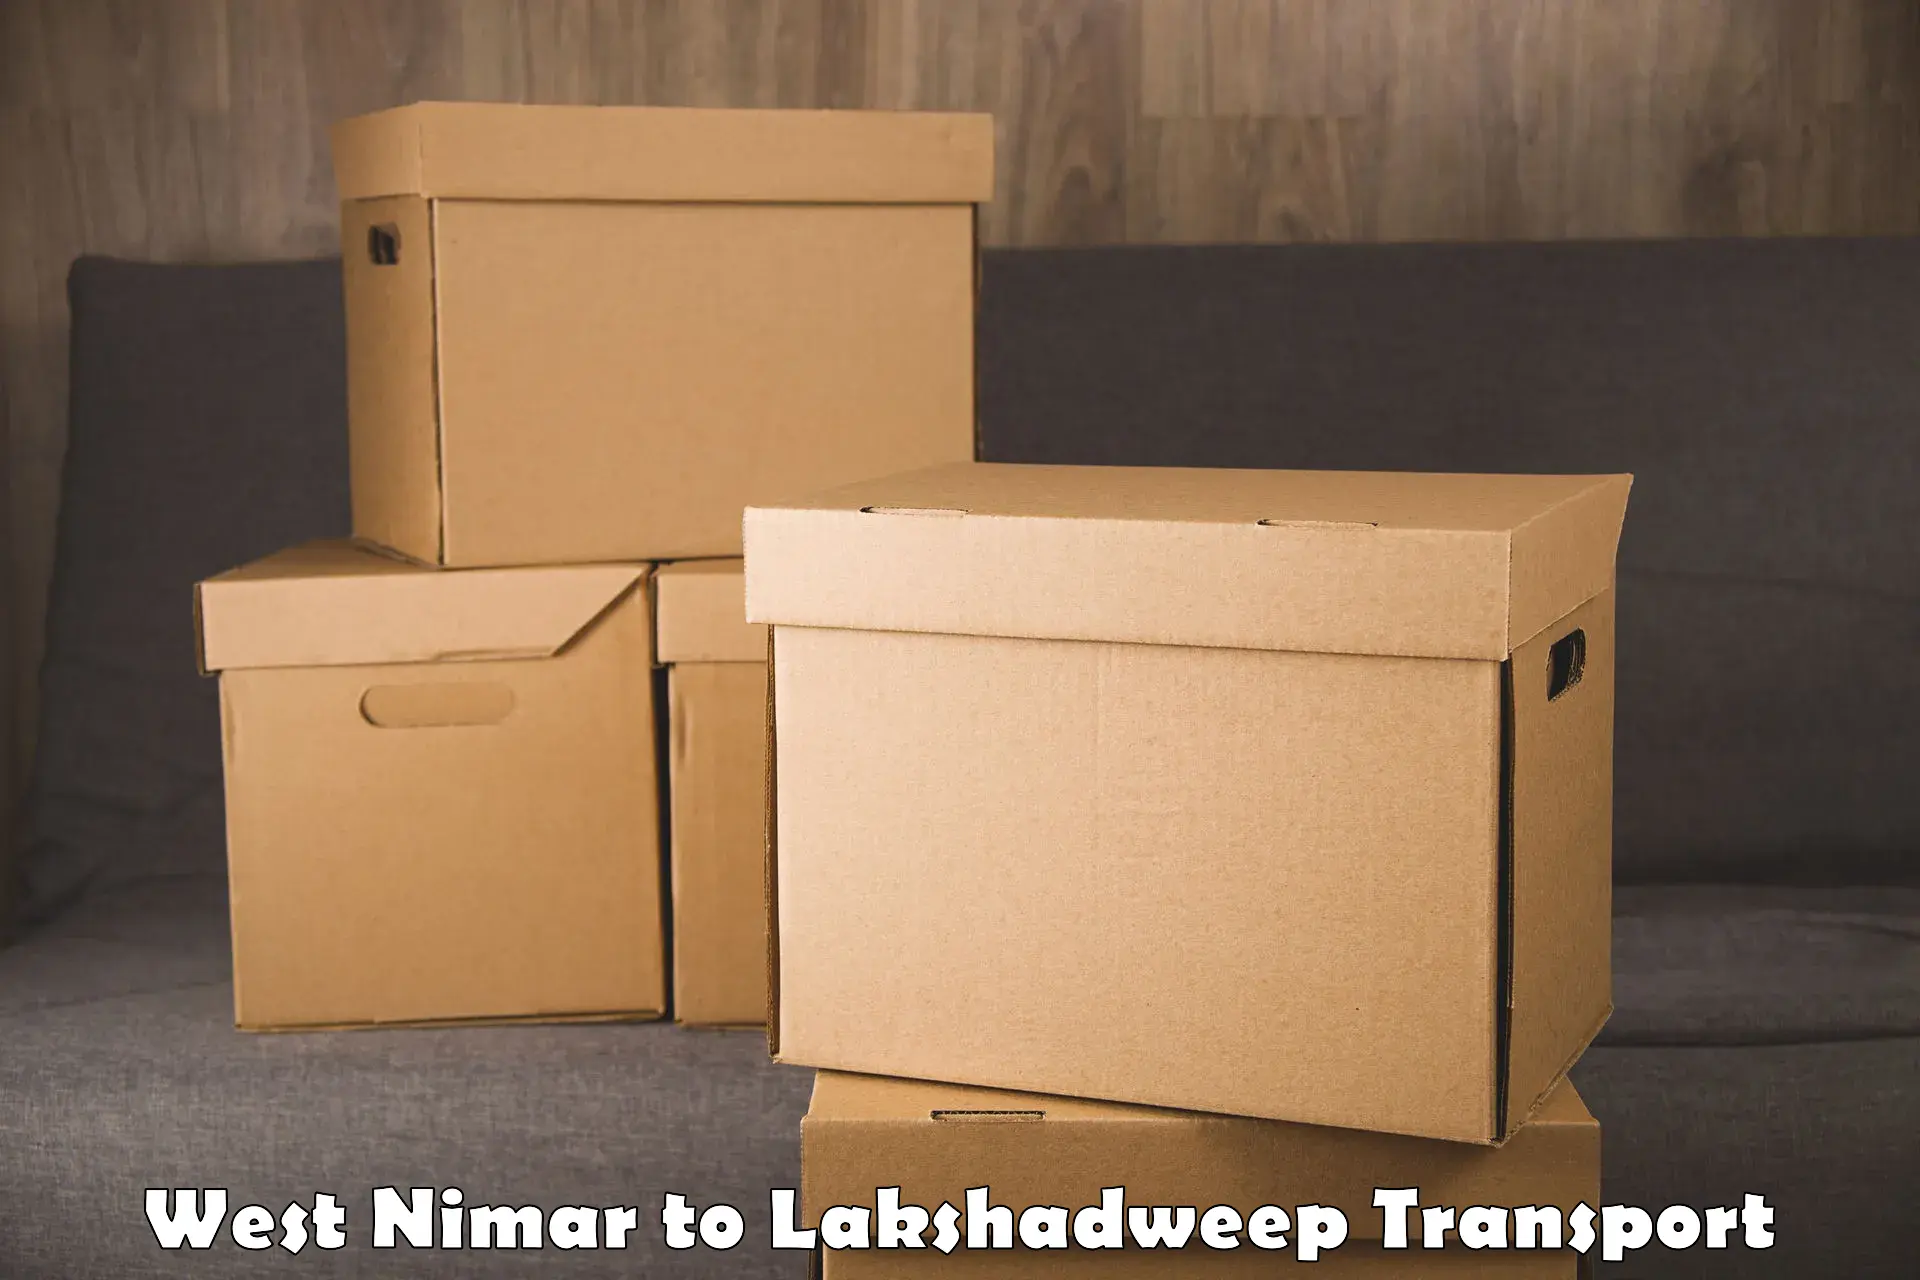 Commercial transport service West Nimar to Lakshadweep